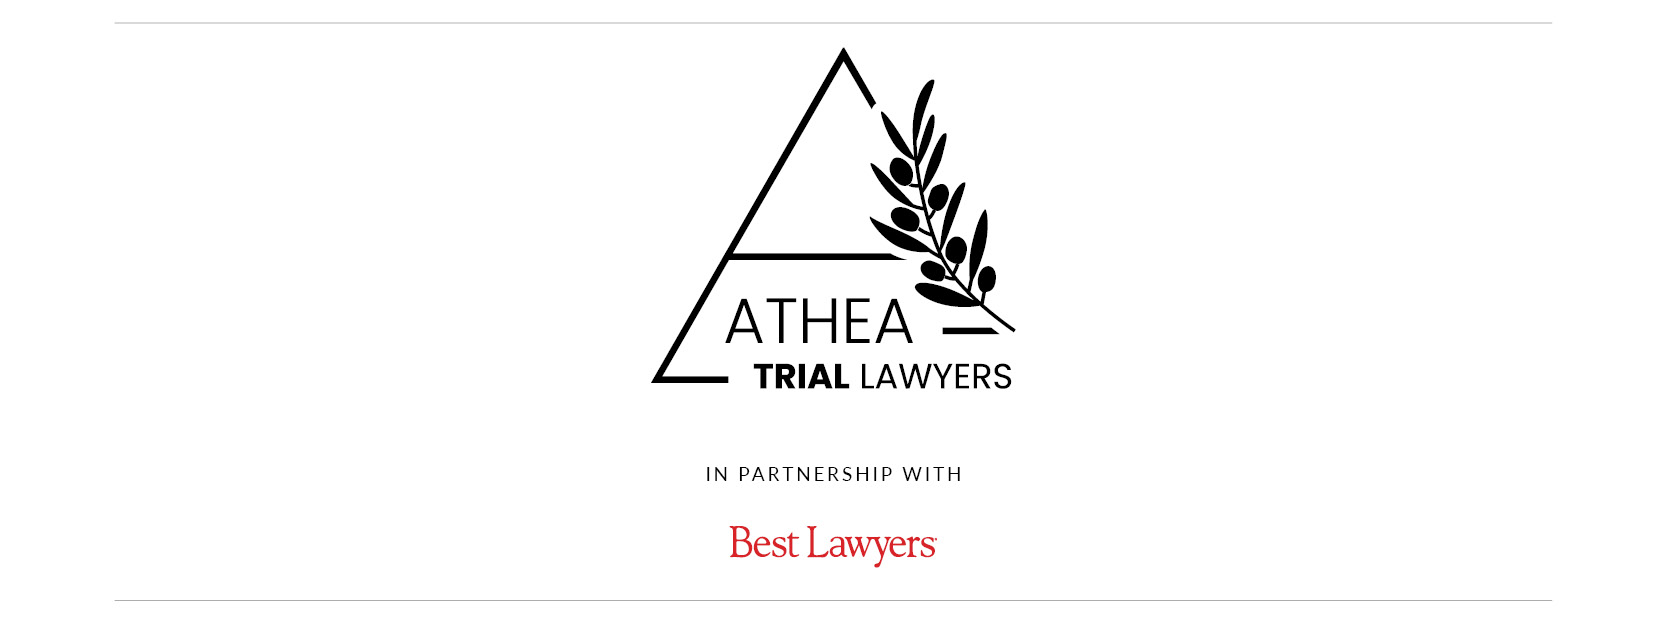 Athea Trial Lawyers black triangle logo with Best Lawyers red logo